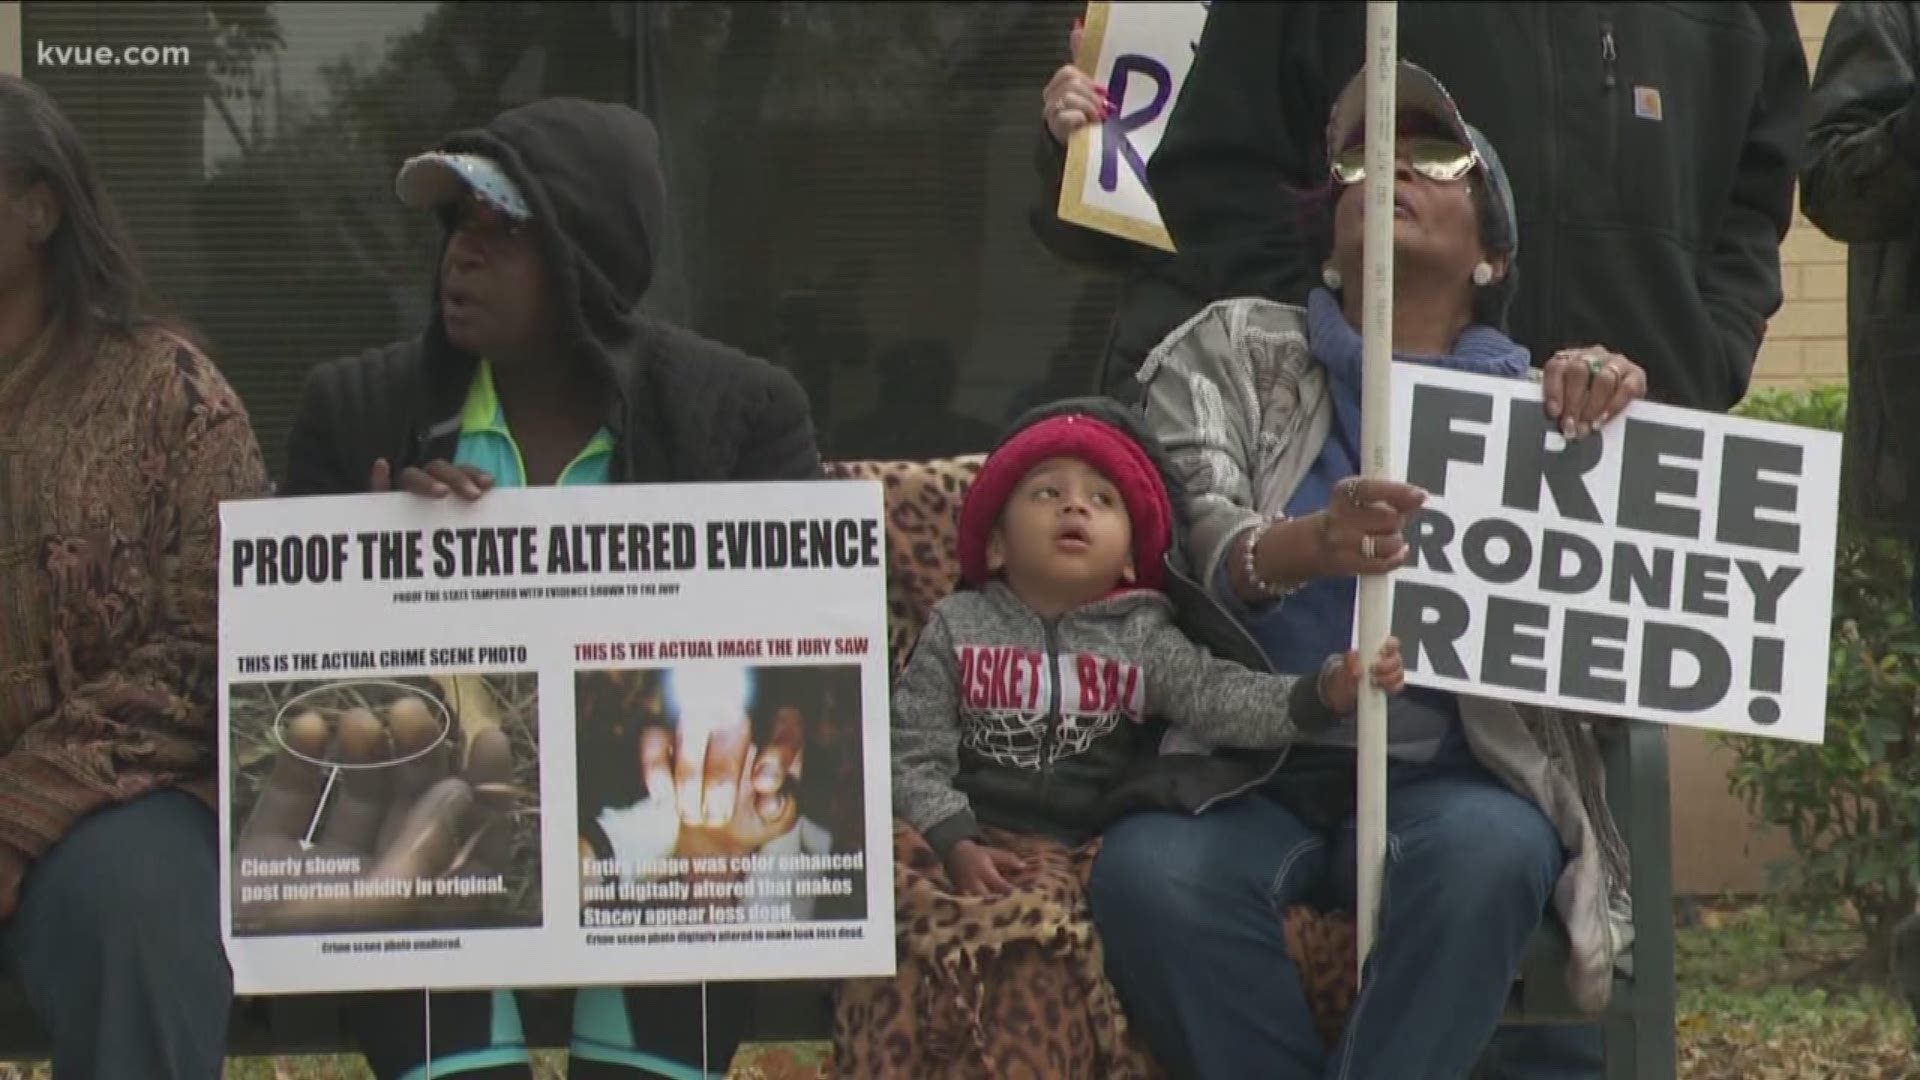 Family, friends and supporters of Reed protested to try to get his scheduled execution stopped.